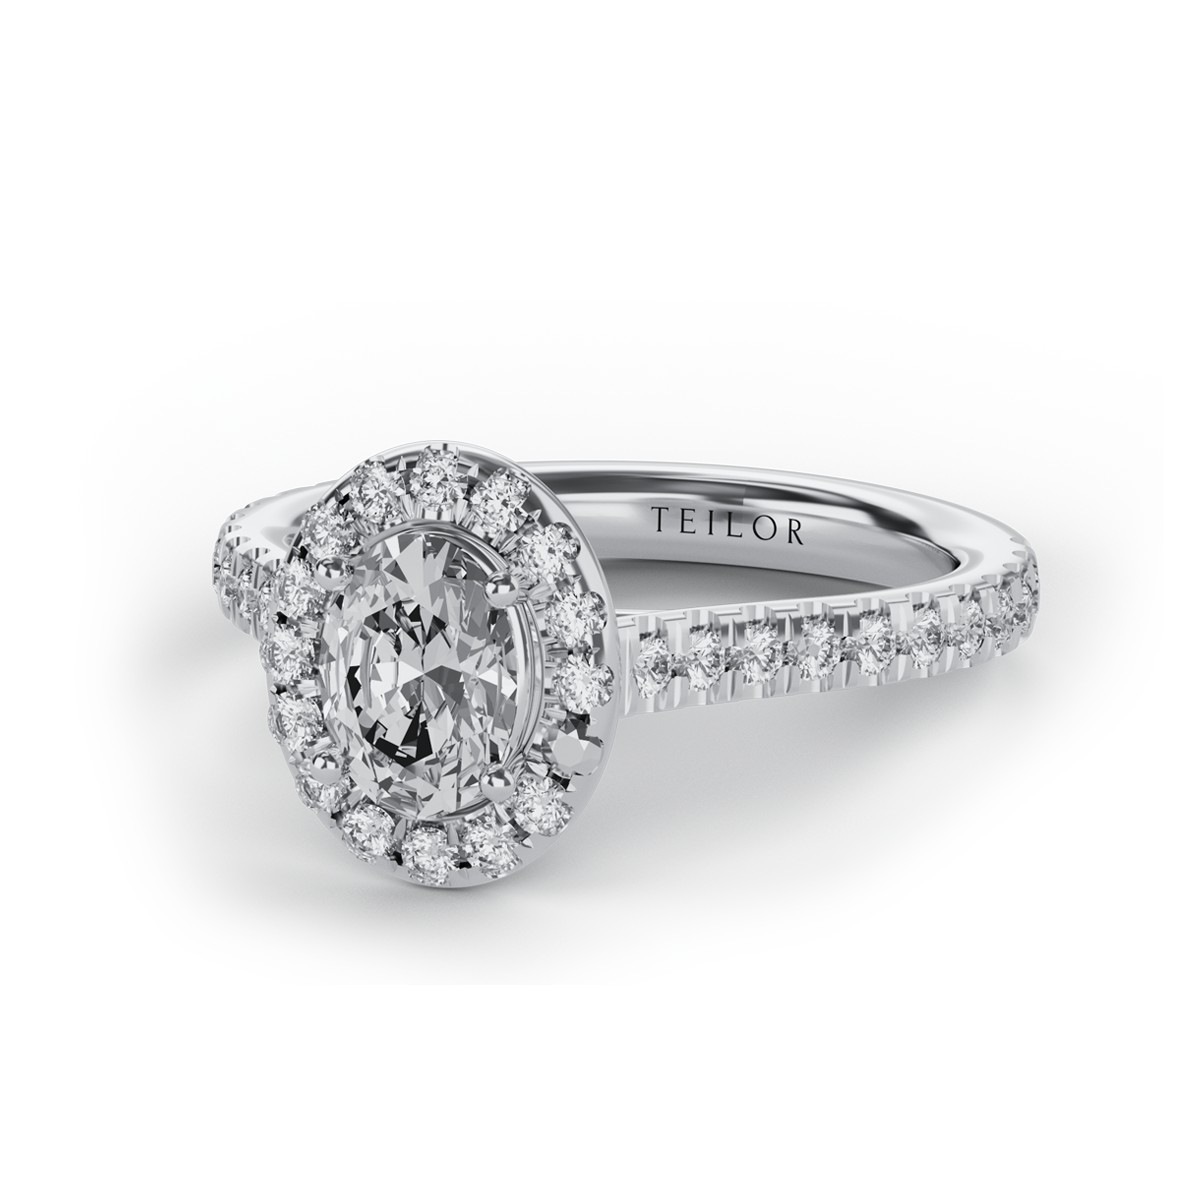 18K white gold engagement ring with 0.8ct diamond and 0.452ct diamonds